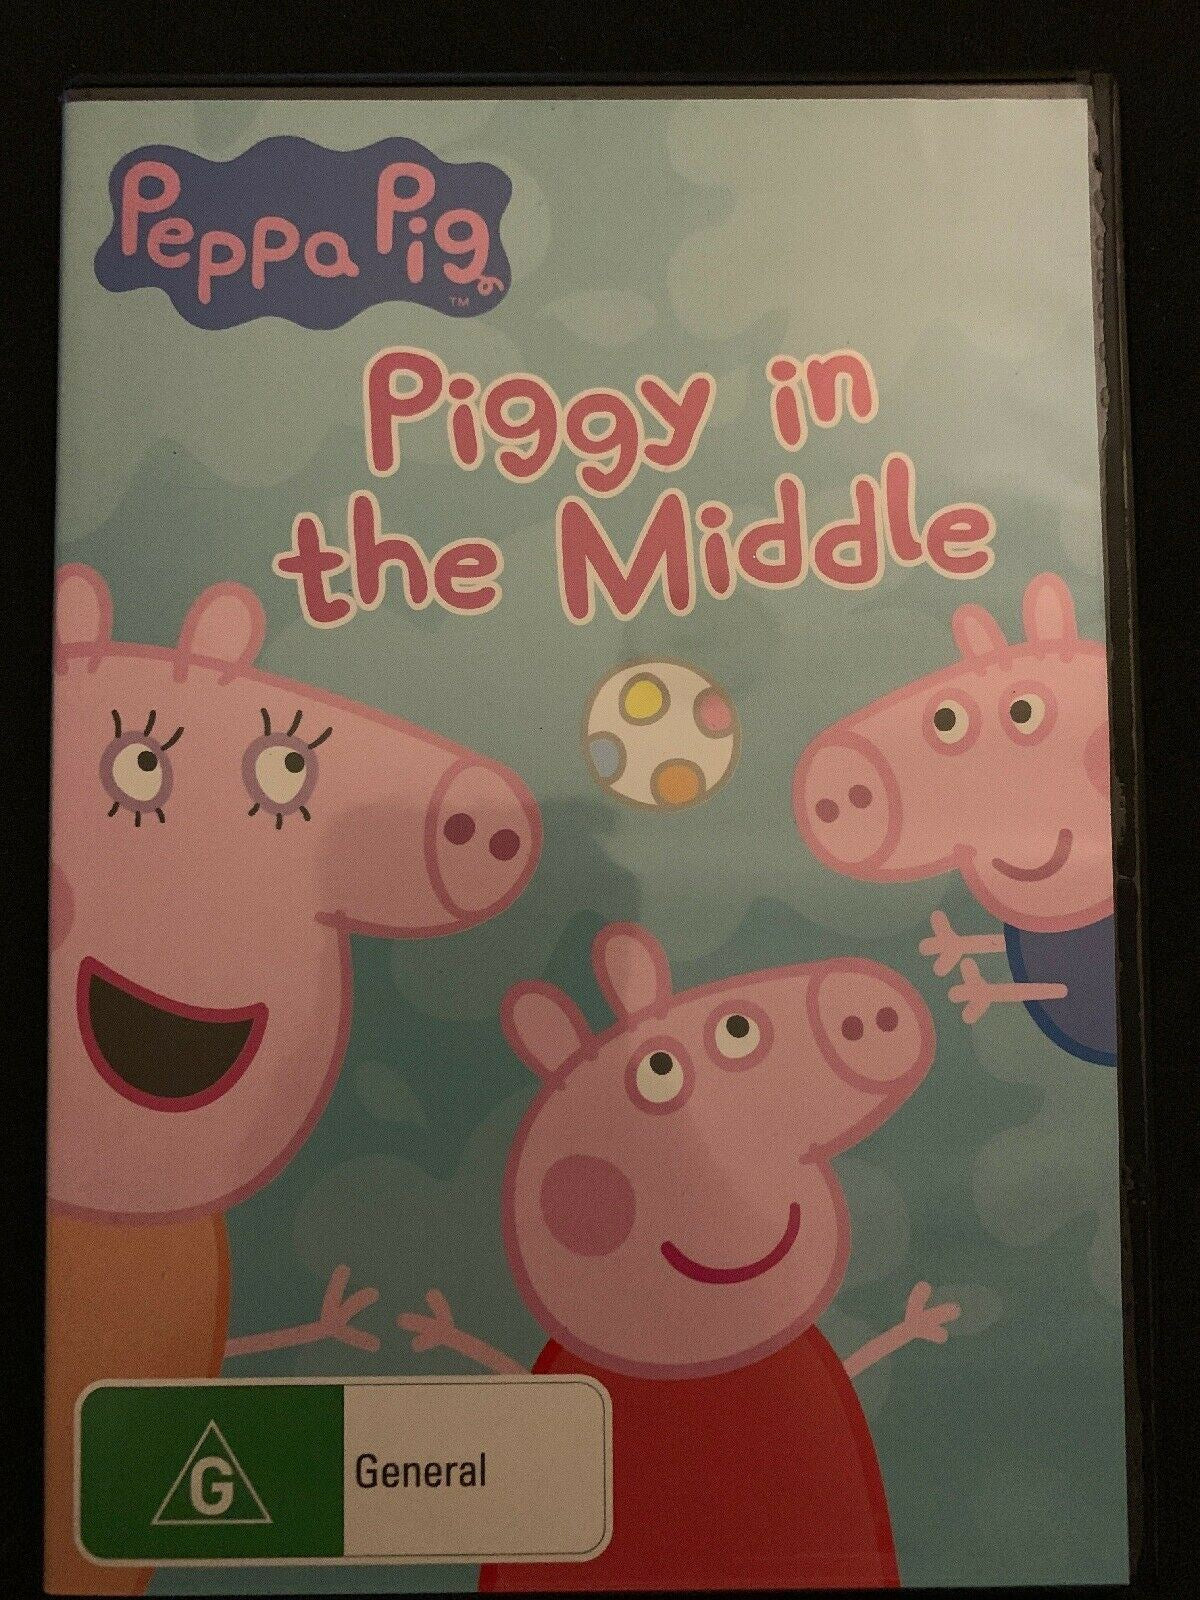 Peppa Pig - Piggy In The Middle And Other Stories (DVD, Region 4) PAL Australia